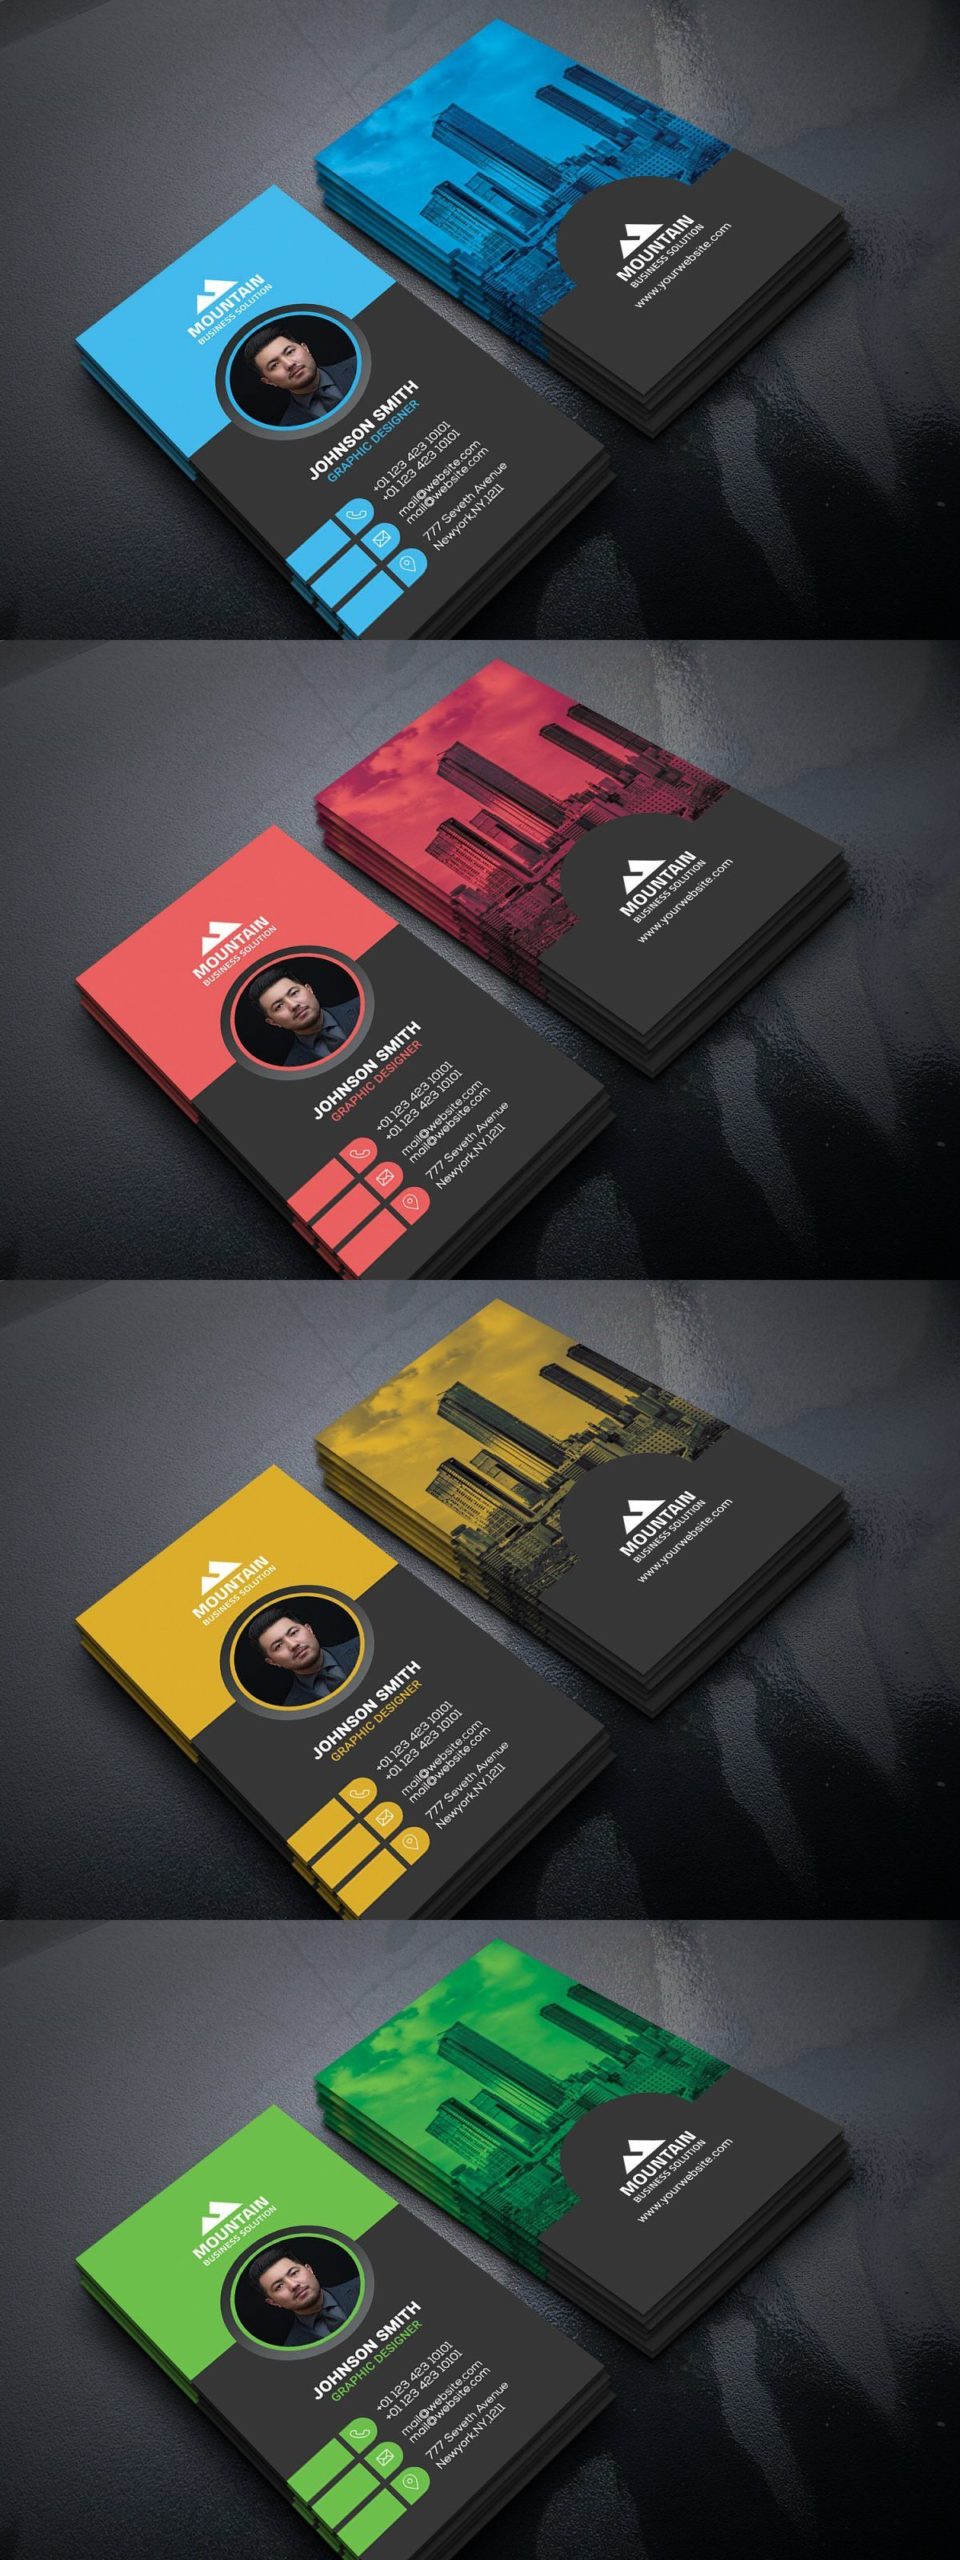 industrial design business cards 1